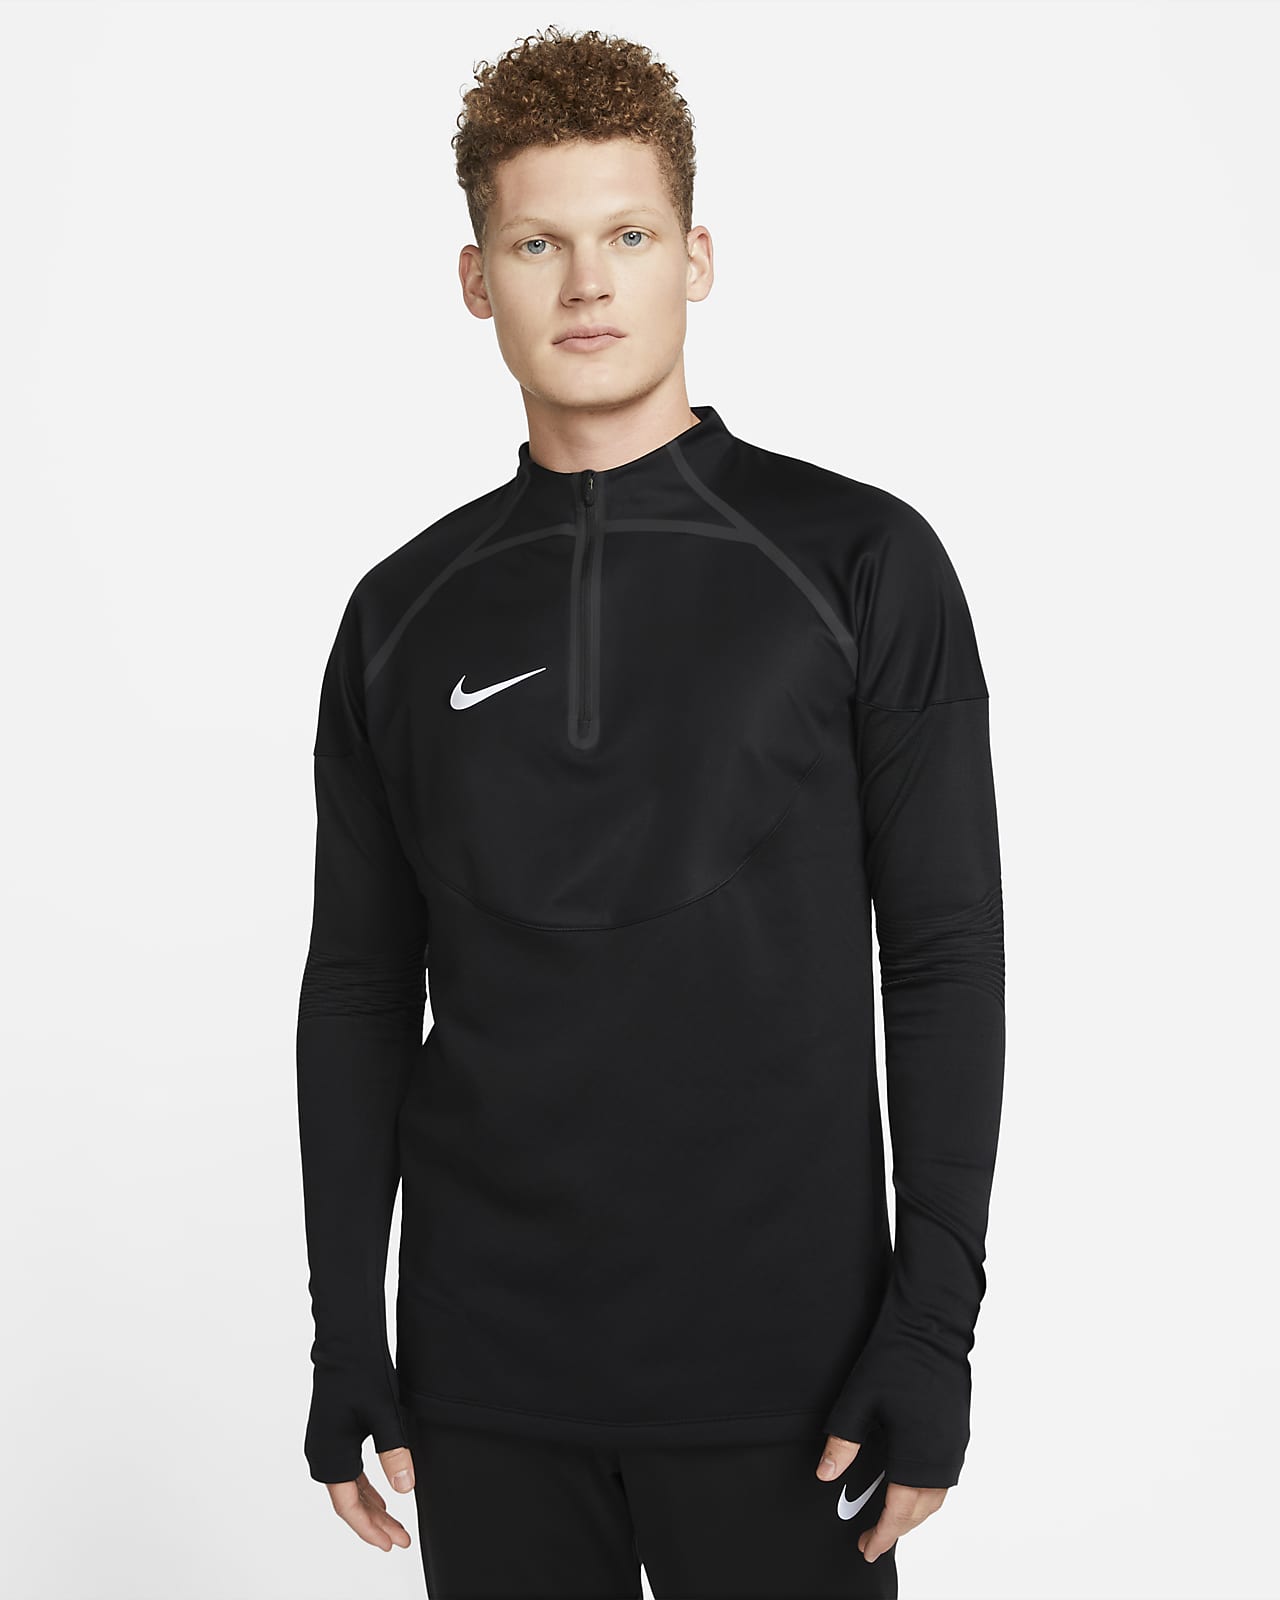 Nike Therma-FIT ADV Strike Winter Warrior Men's Soccer Drill Top